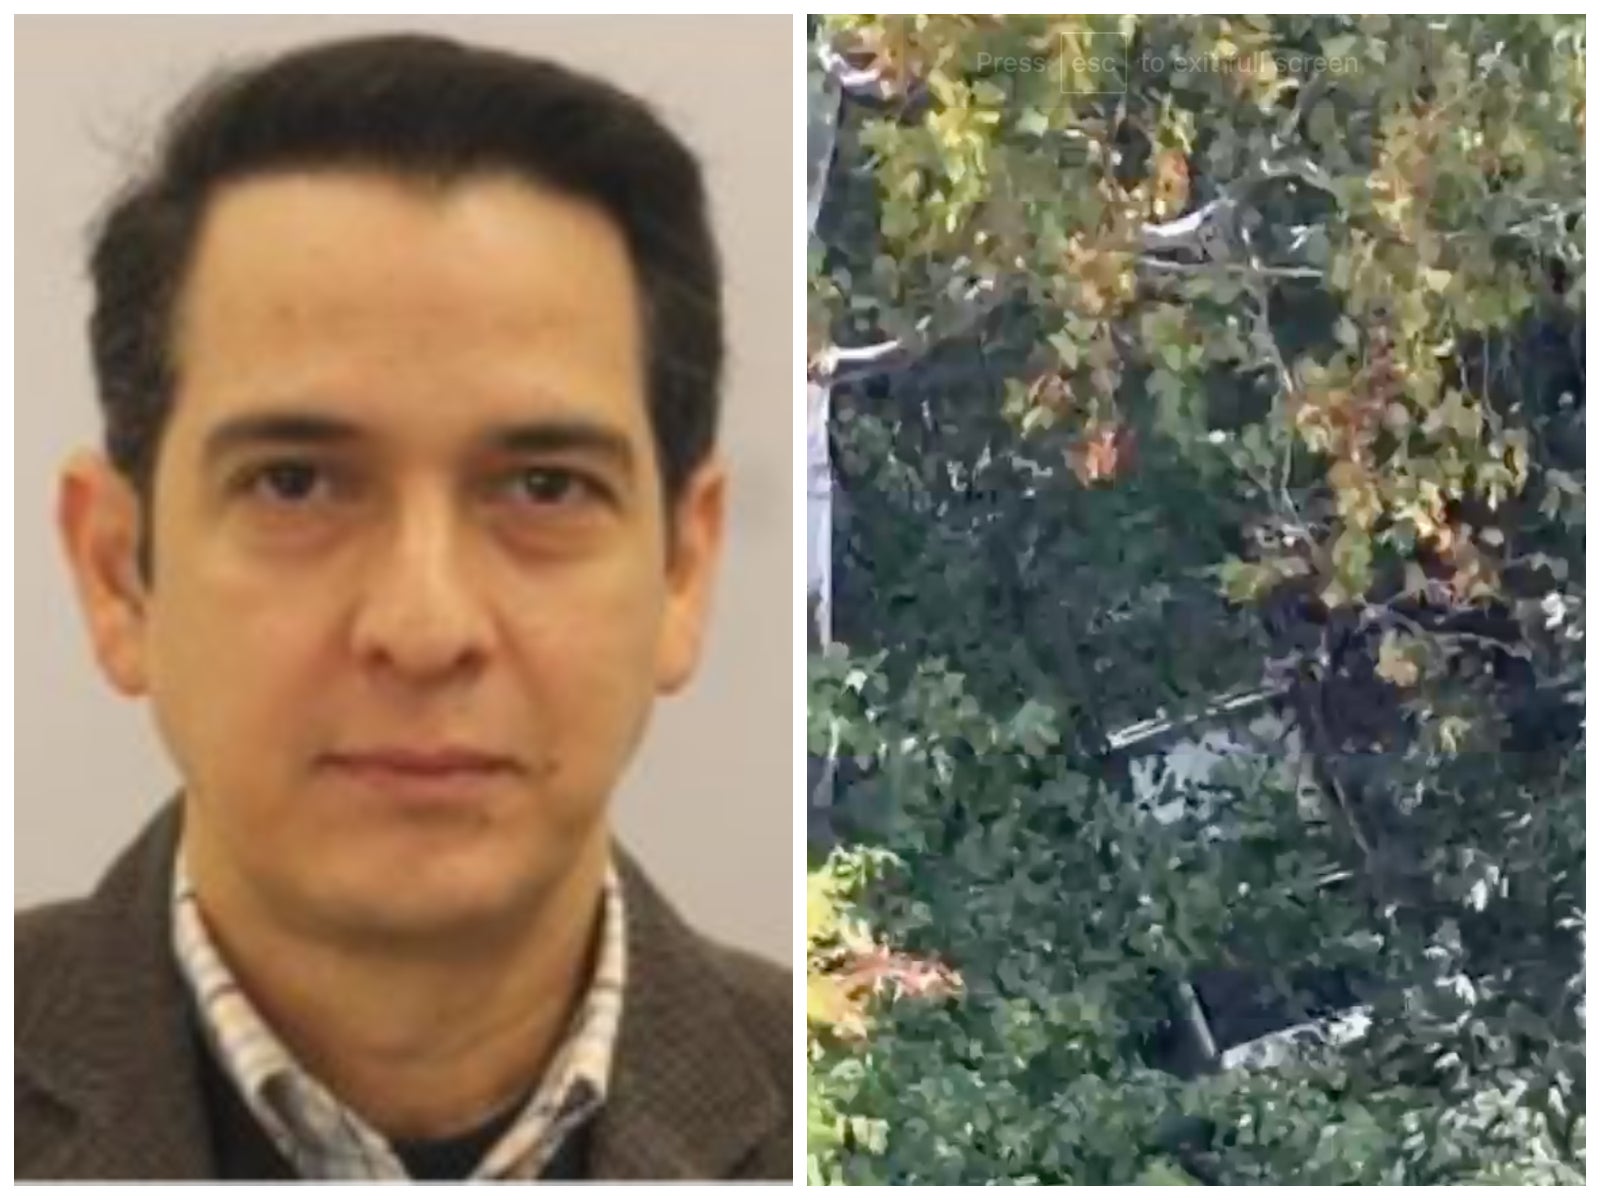 The vehicle of suspected gunman Pedro Argote was discovered Saturday morning in a heavily wooded area